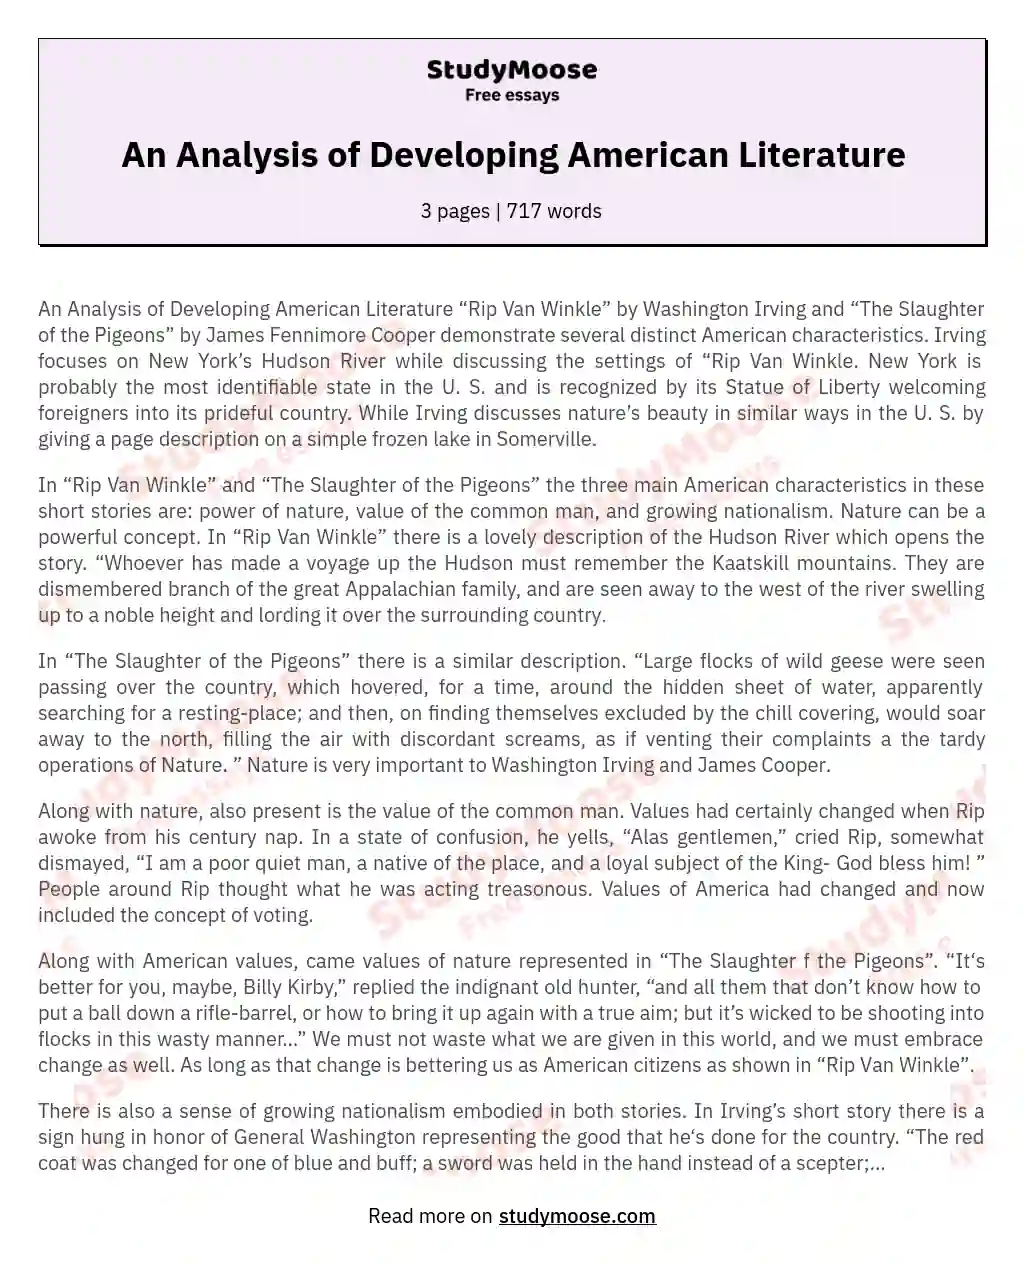 An Analysis of Developing American Literature essay